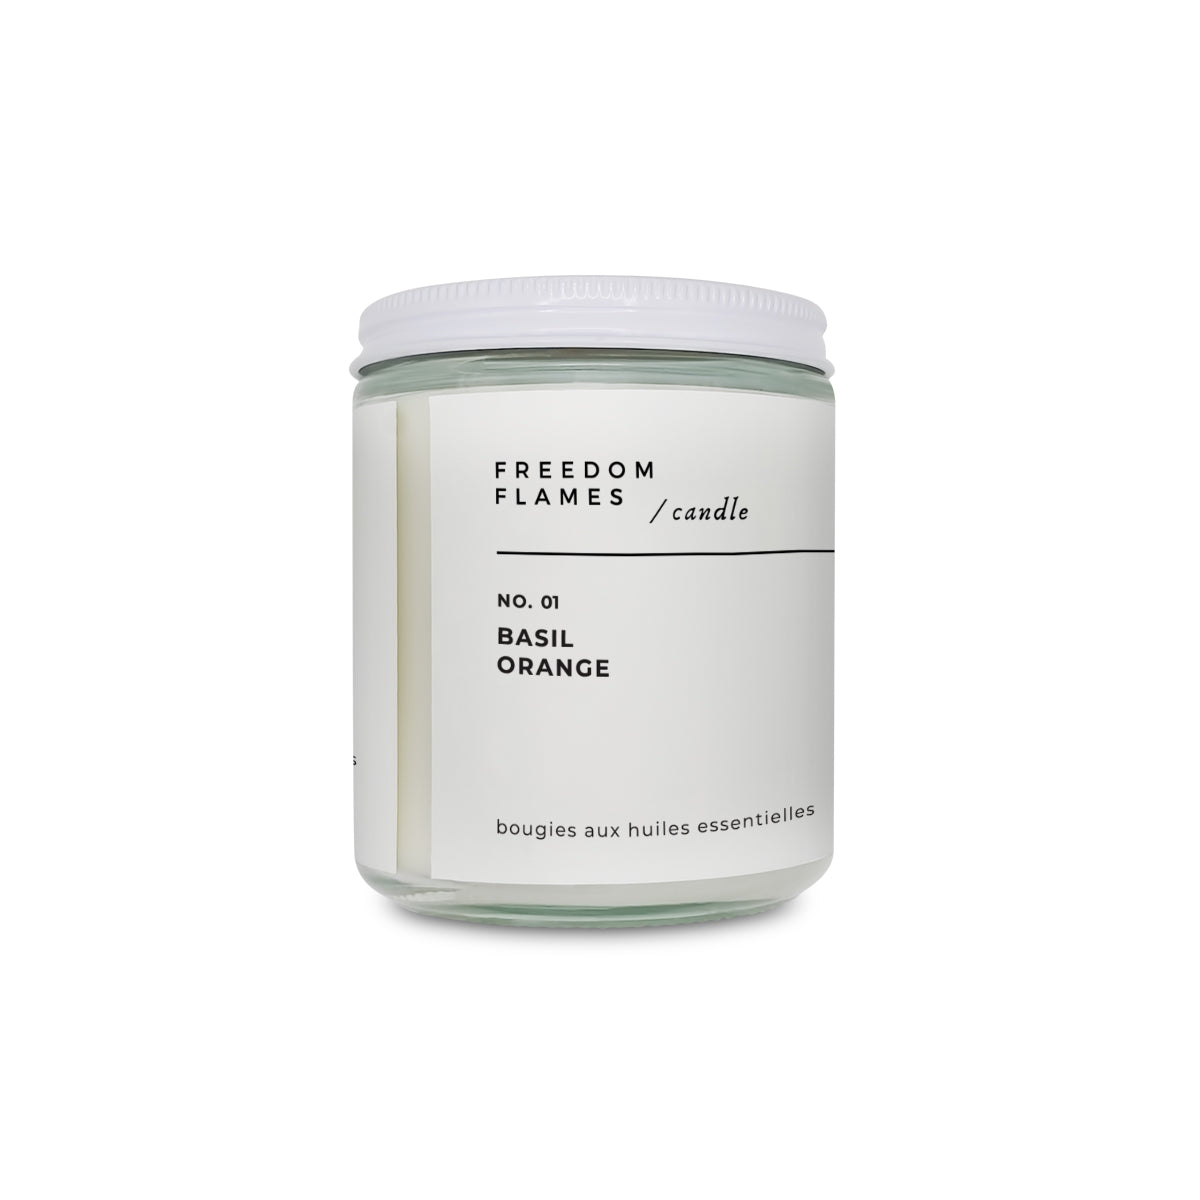 Freedom Flames Basil Orange Essential Oil Candle 250g | Home fragrances | The Green Collective SG